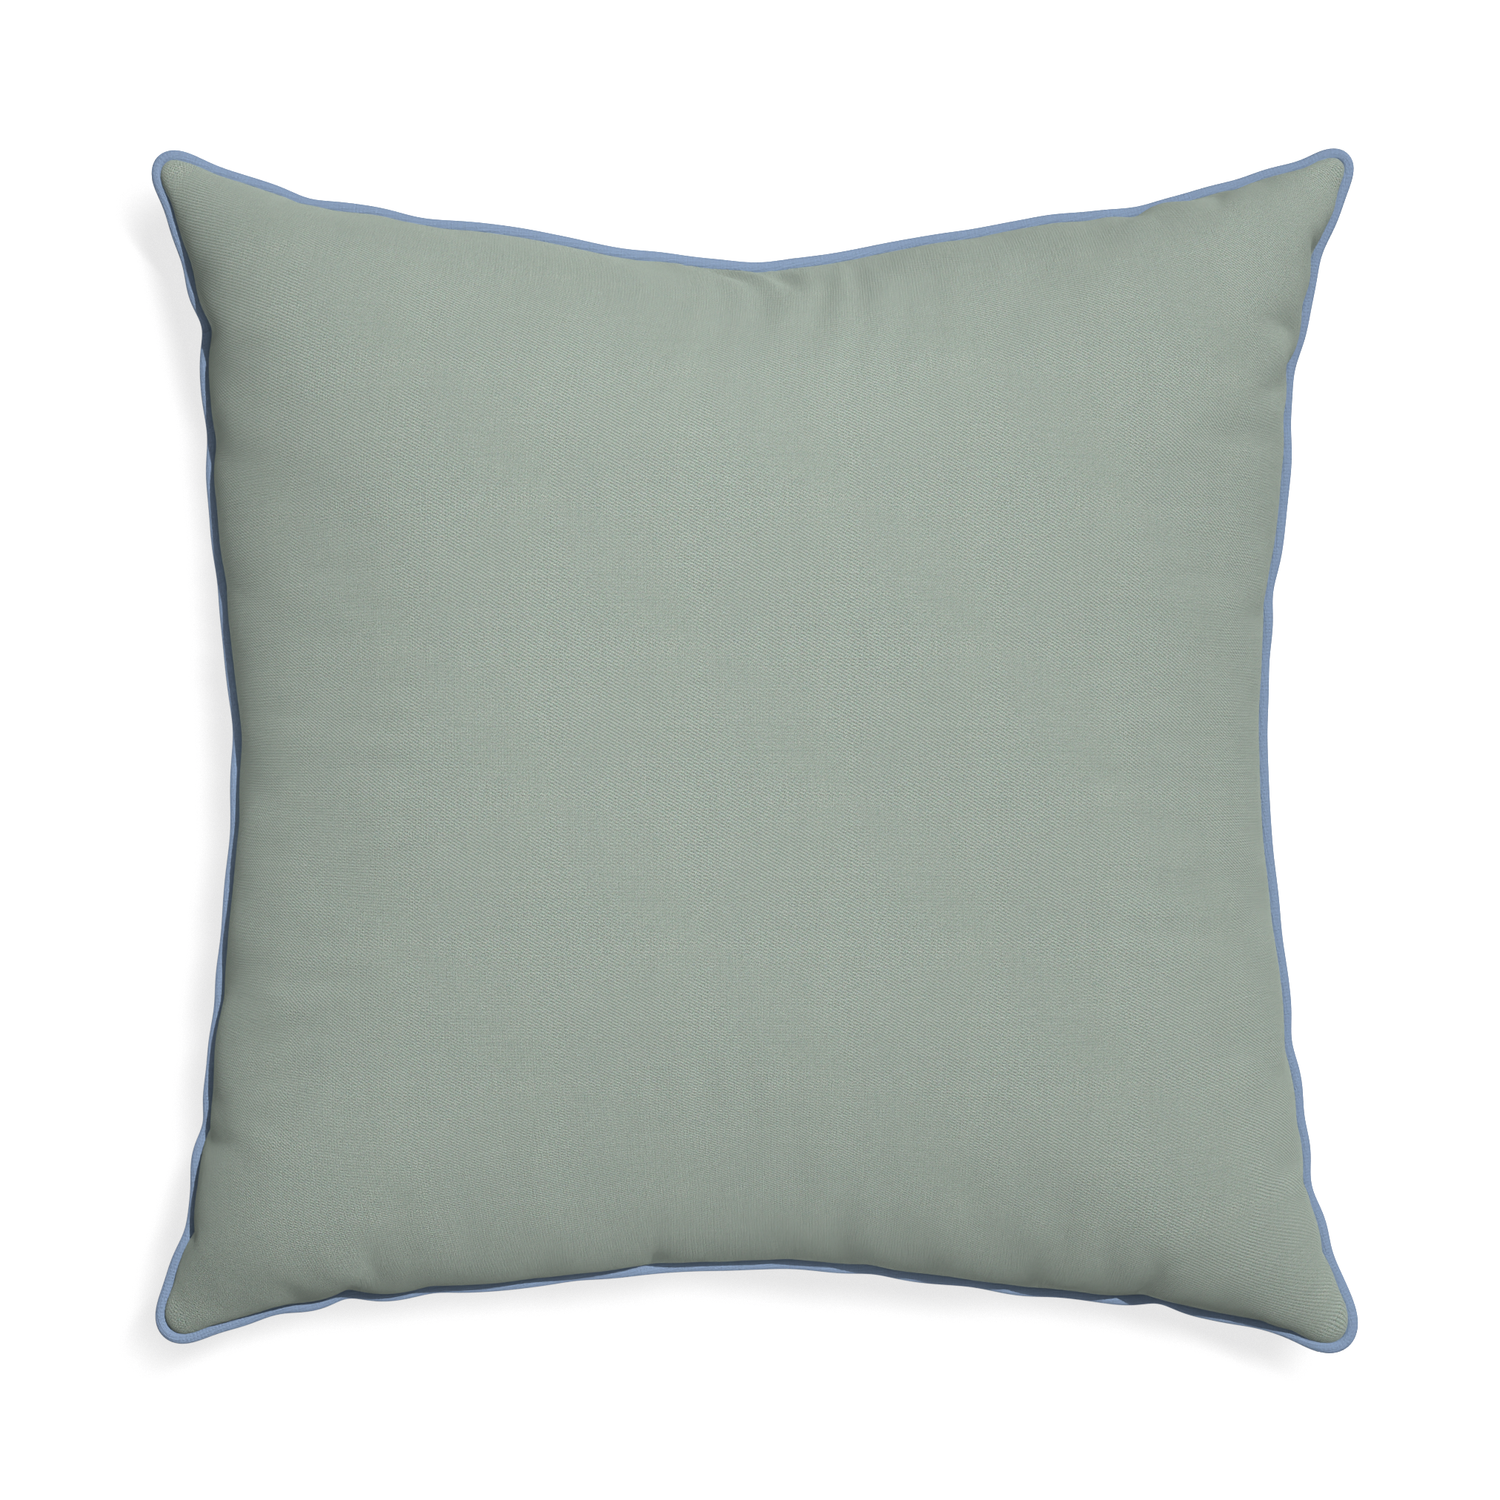 Euro-sham sage custom sage green cottonpillow with sky piping on white background